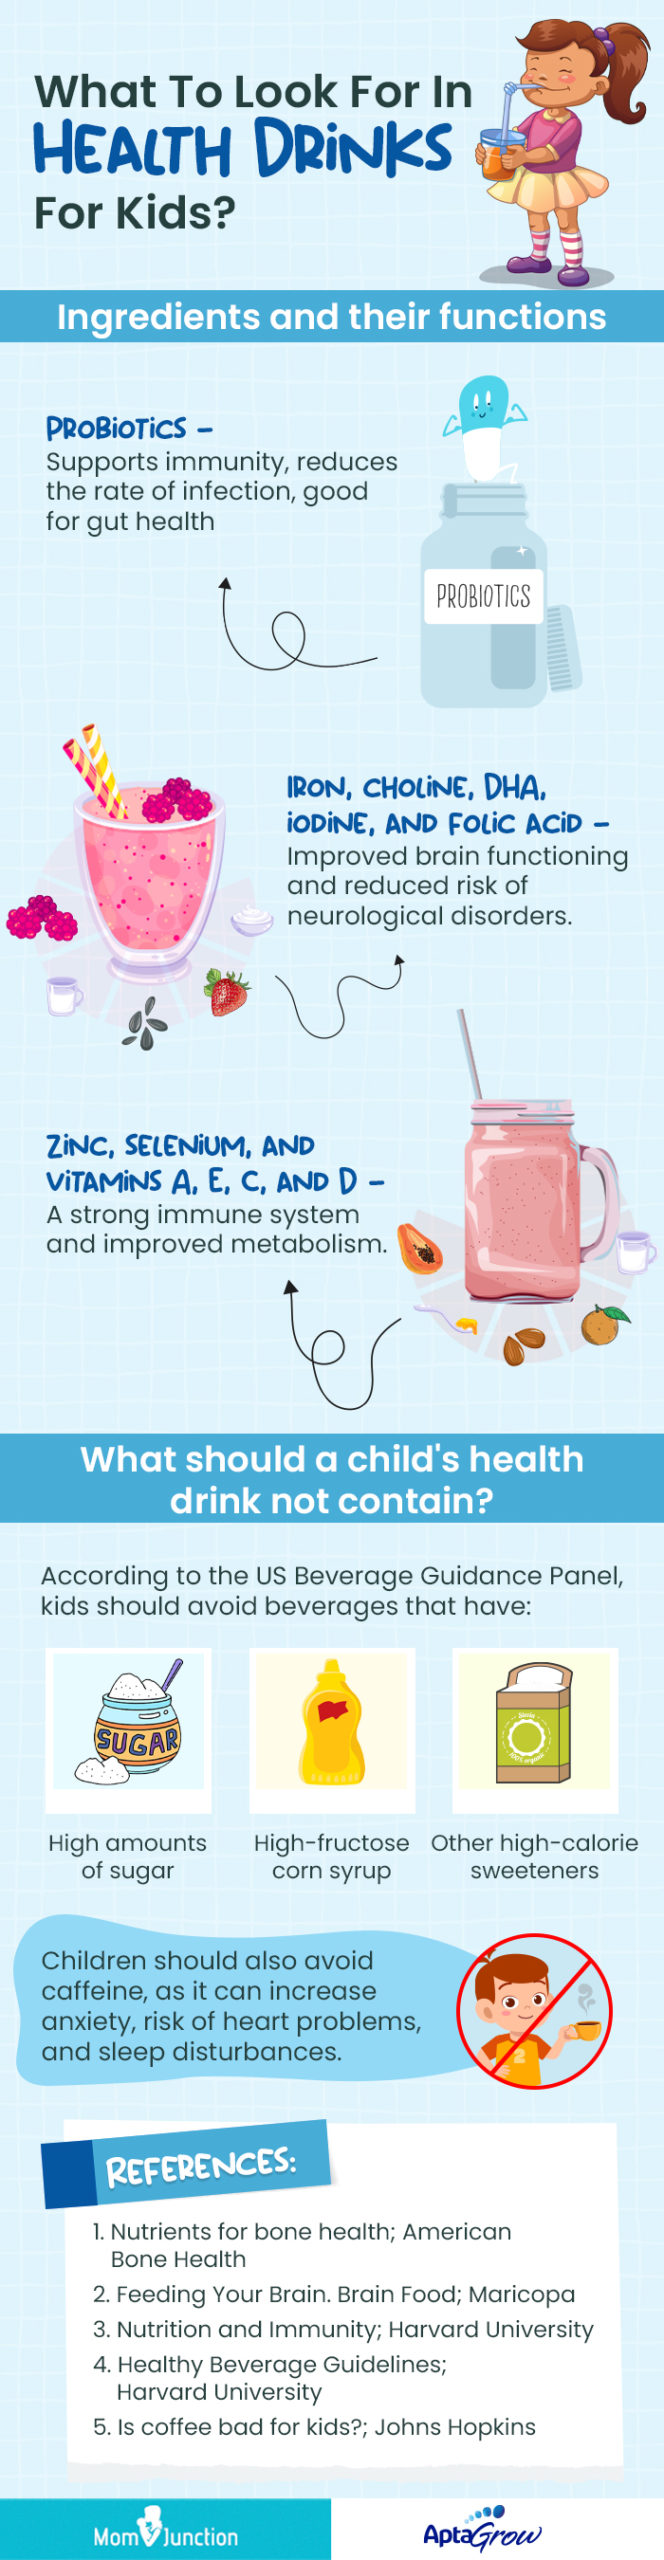 Health Drinks for Kids [Infographic]